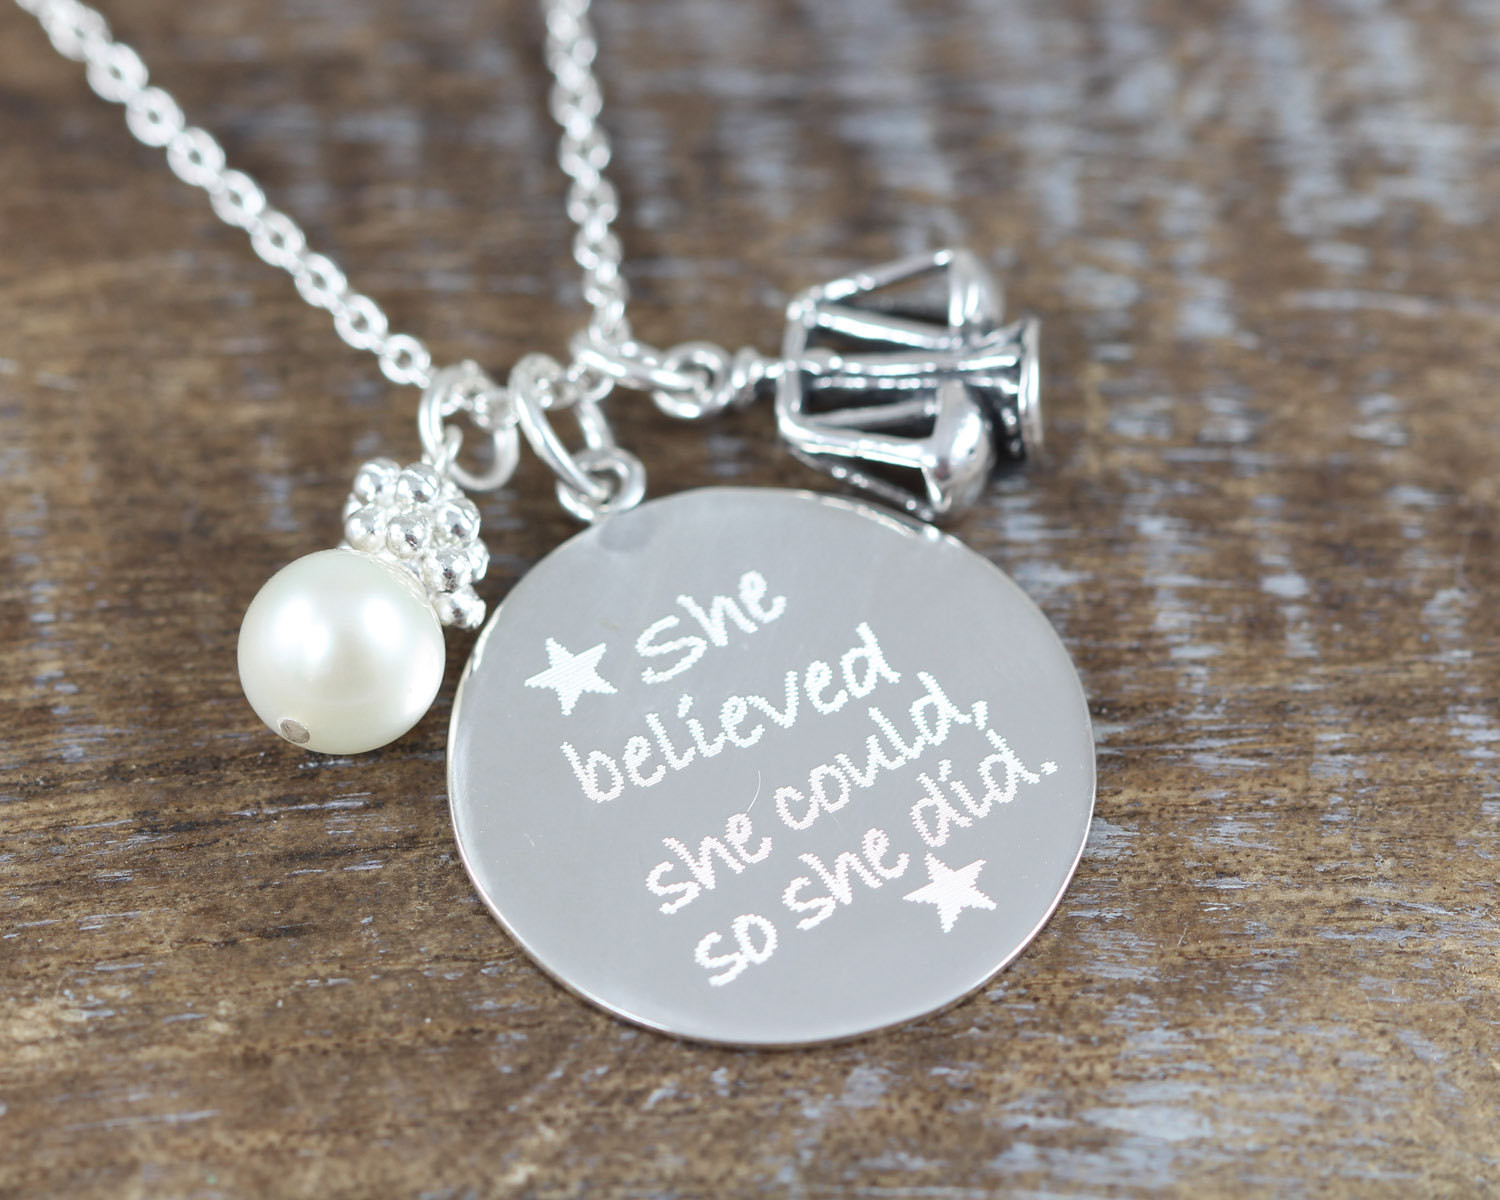 Personalized Graduation Gift Ideas
 Personalized Jewelry Graduation Gift for Lawyer Judge